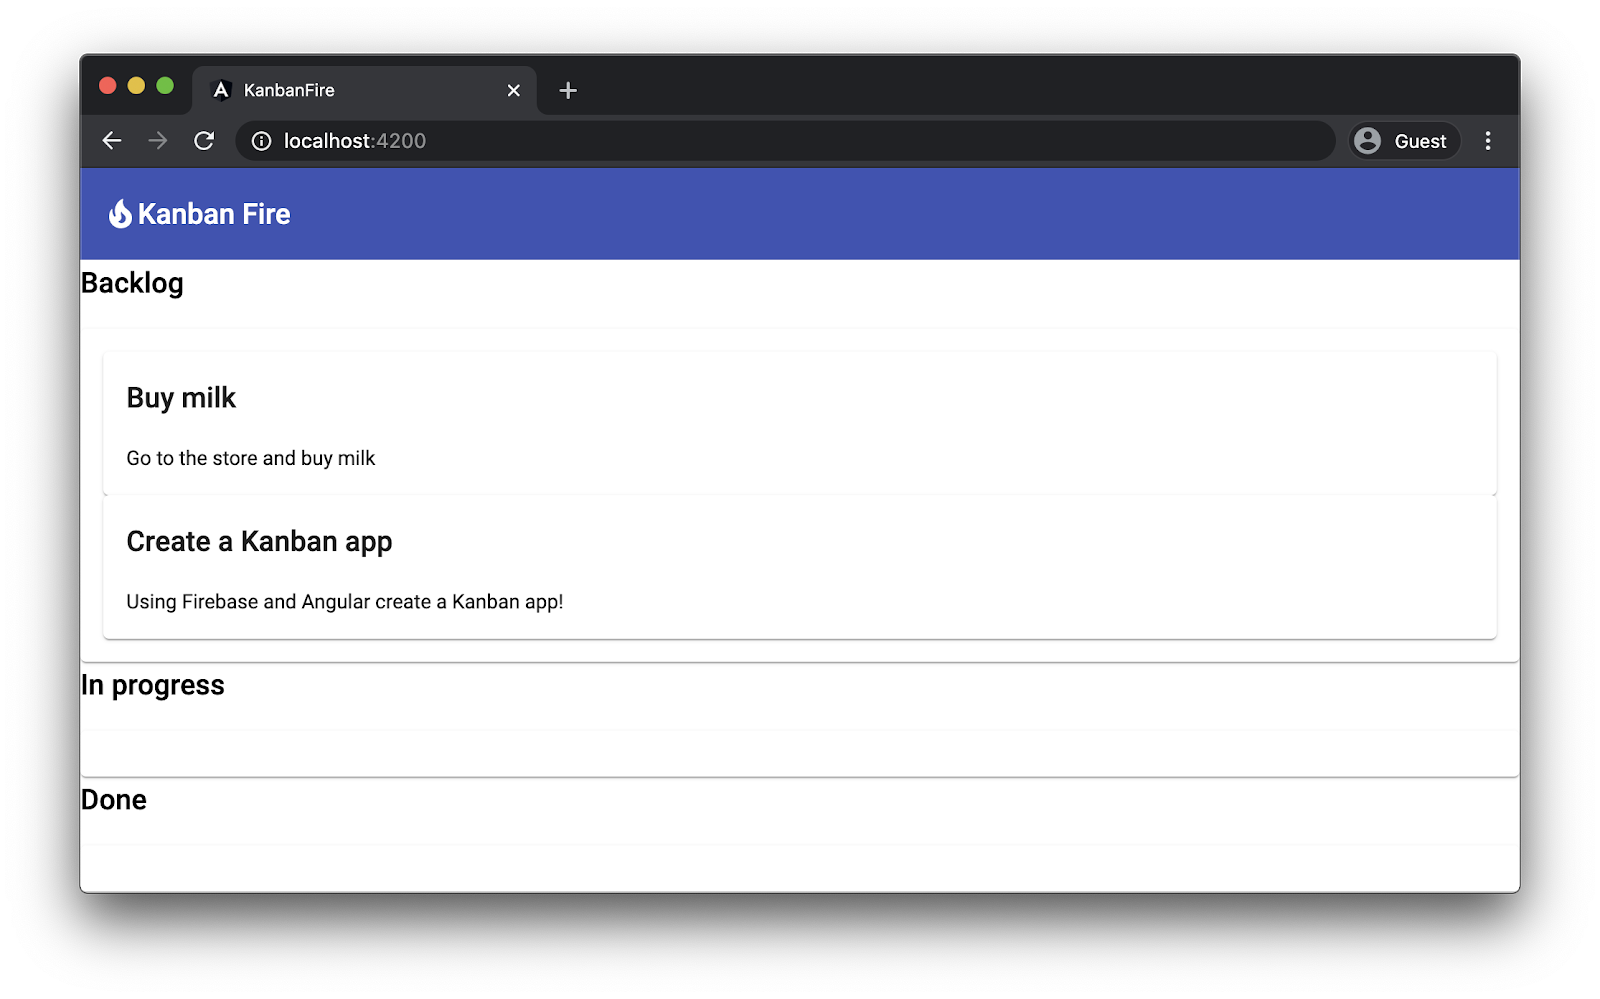 Building a web application with Angular and Firebase